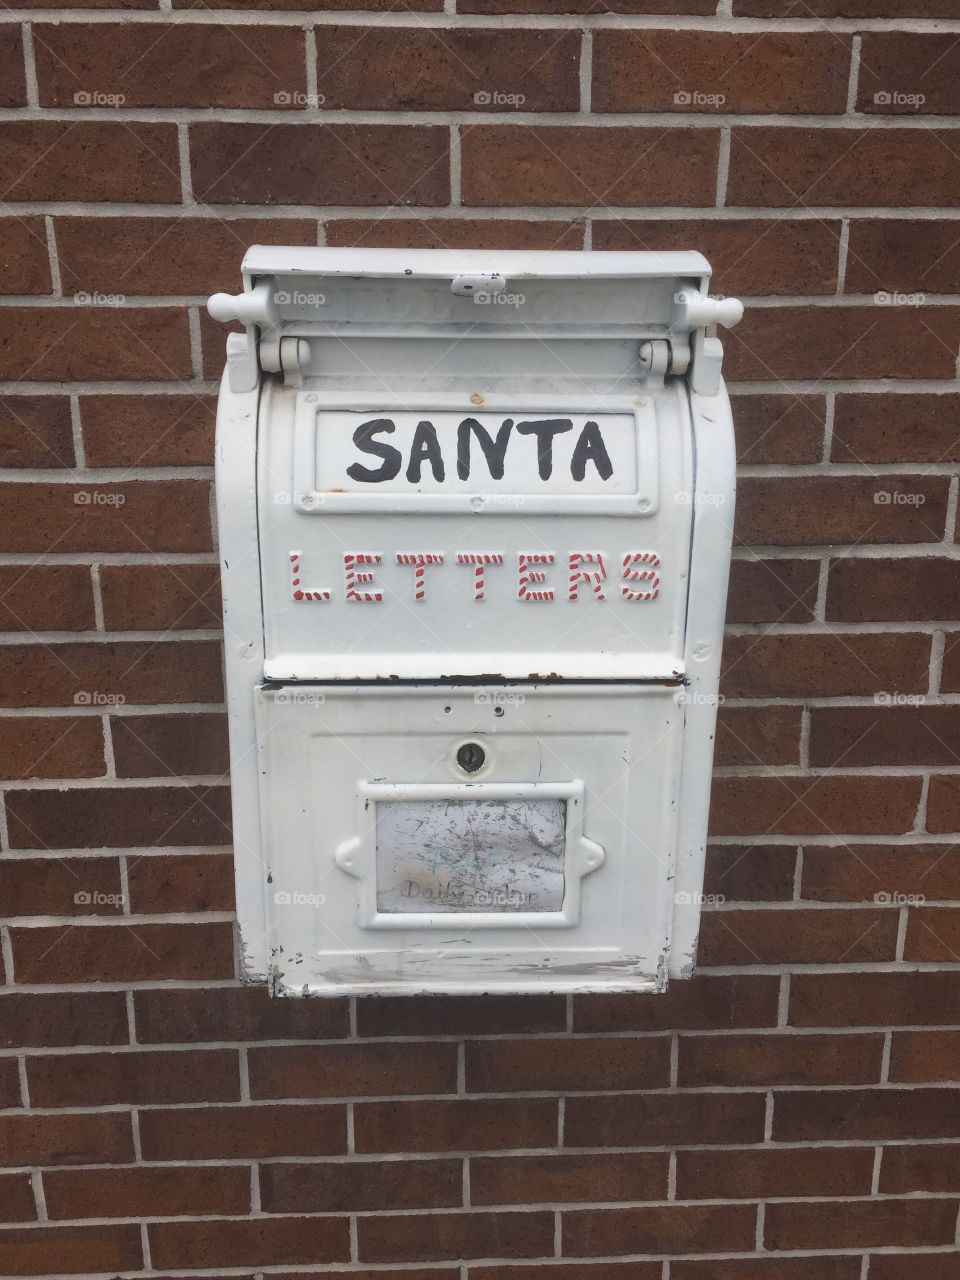 Letters to Santa
Yes, Virginia there is a Santa Clause 